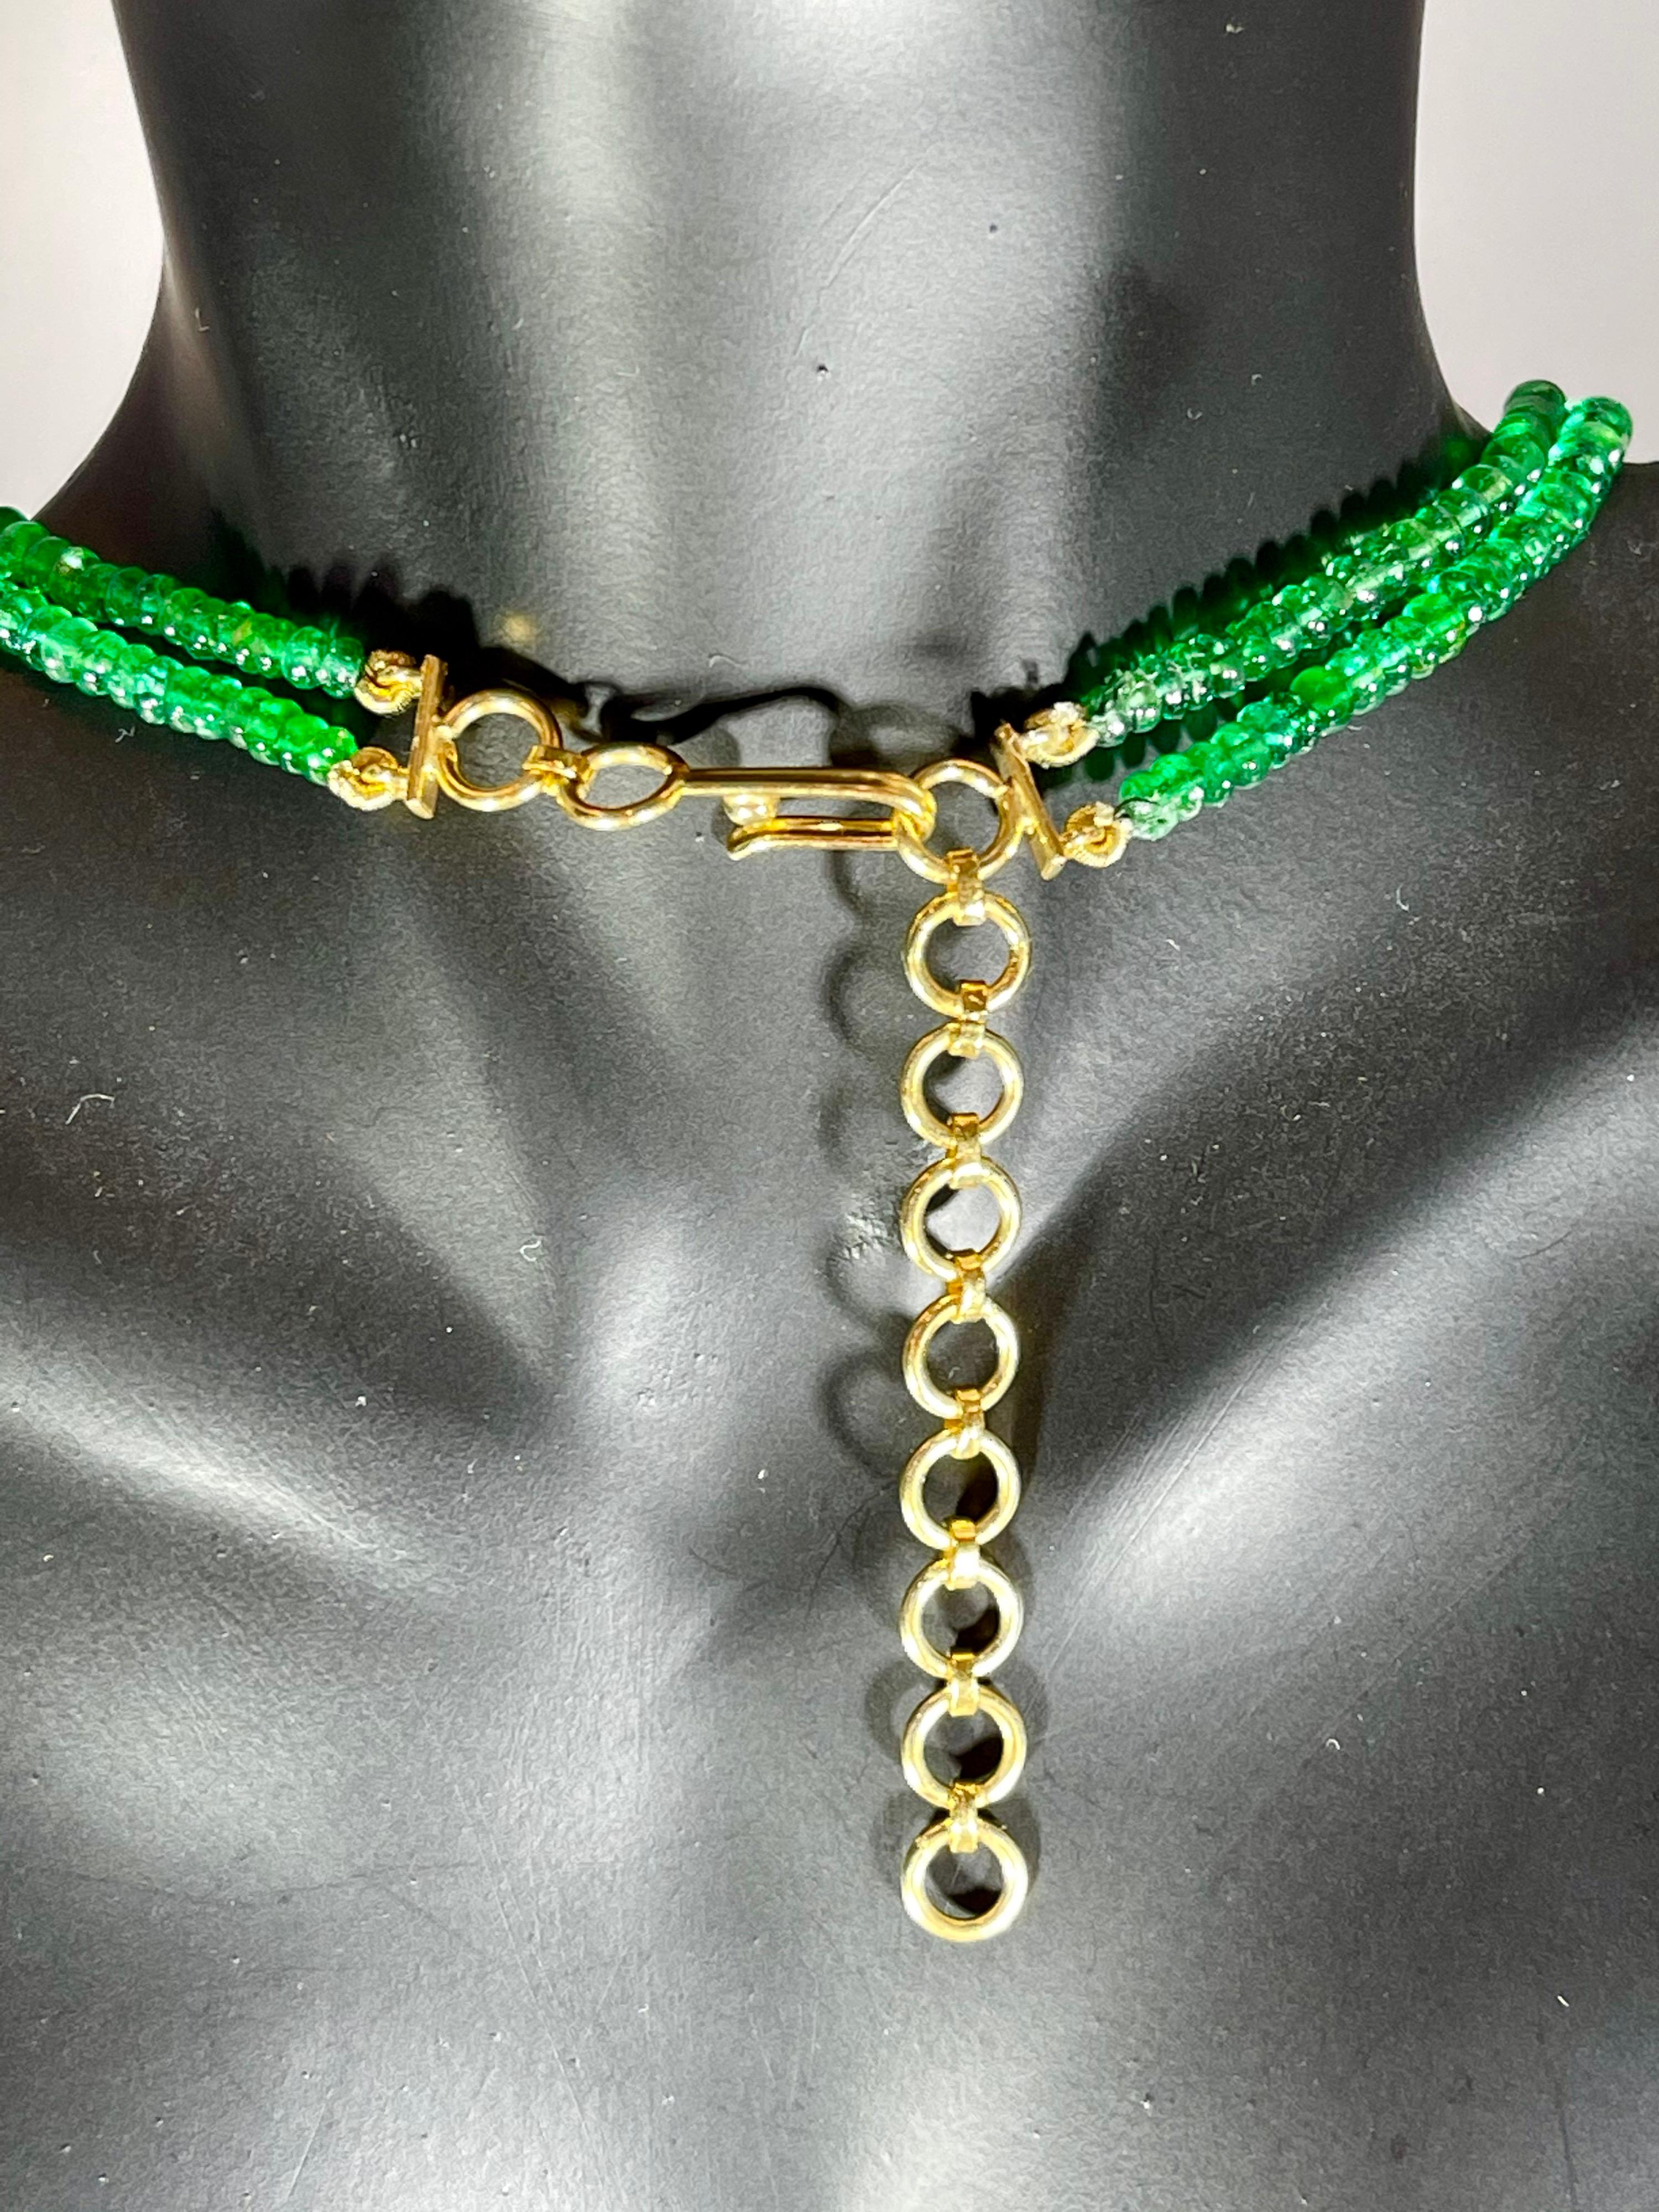 125ct Fine Emerald Beads 2 Line Necklace with 14 Kt Yellow Gold Clasp Adjustable 8